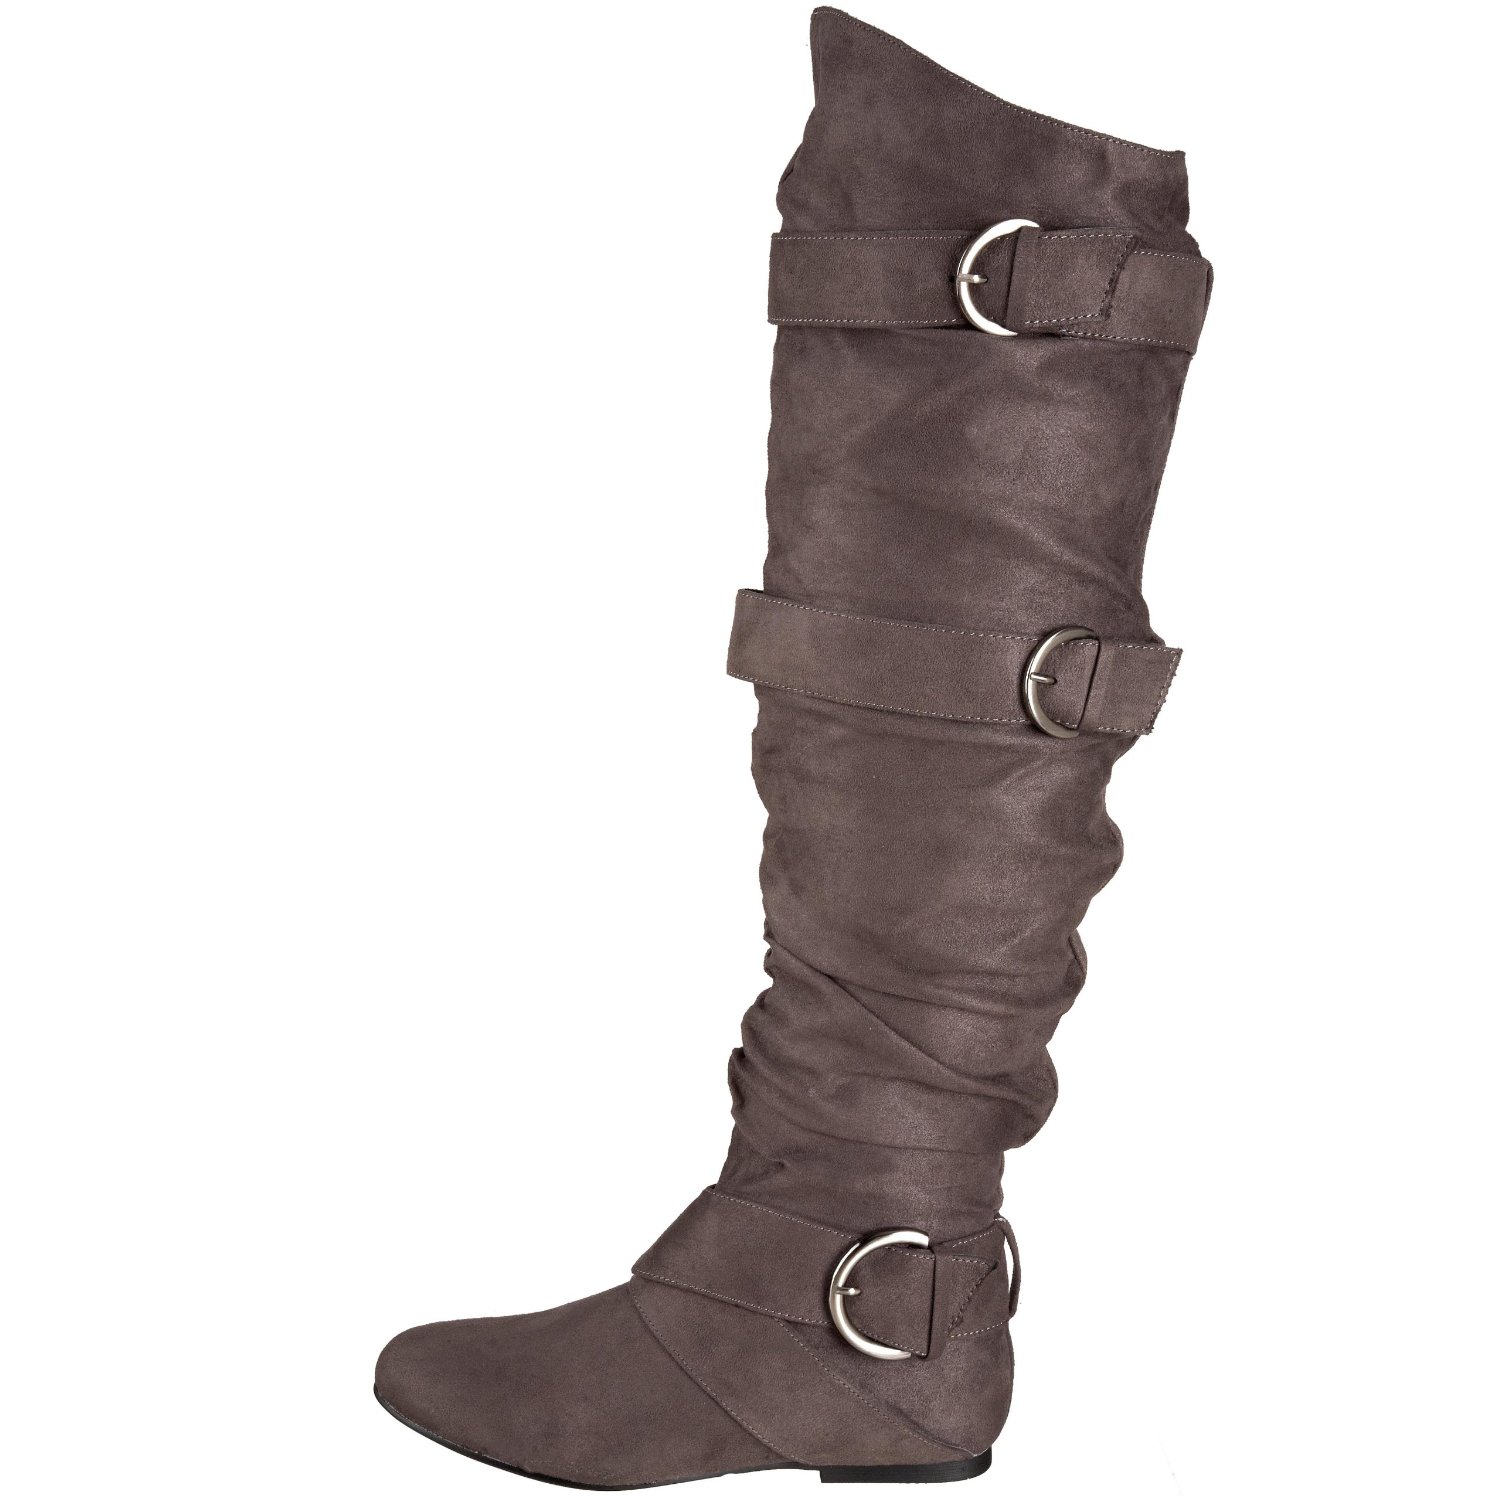 buy shoes online: Not Rated Women's Single D Knee-High Boot